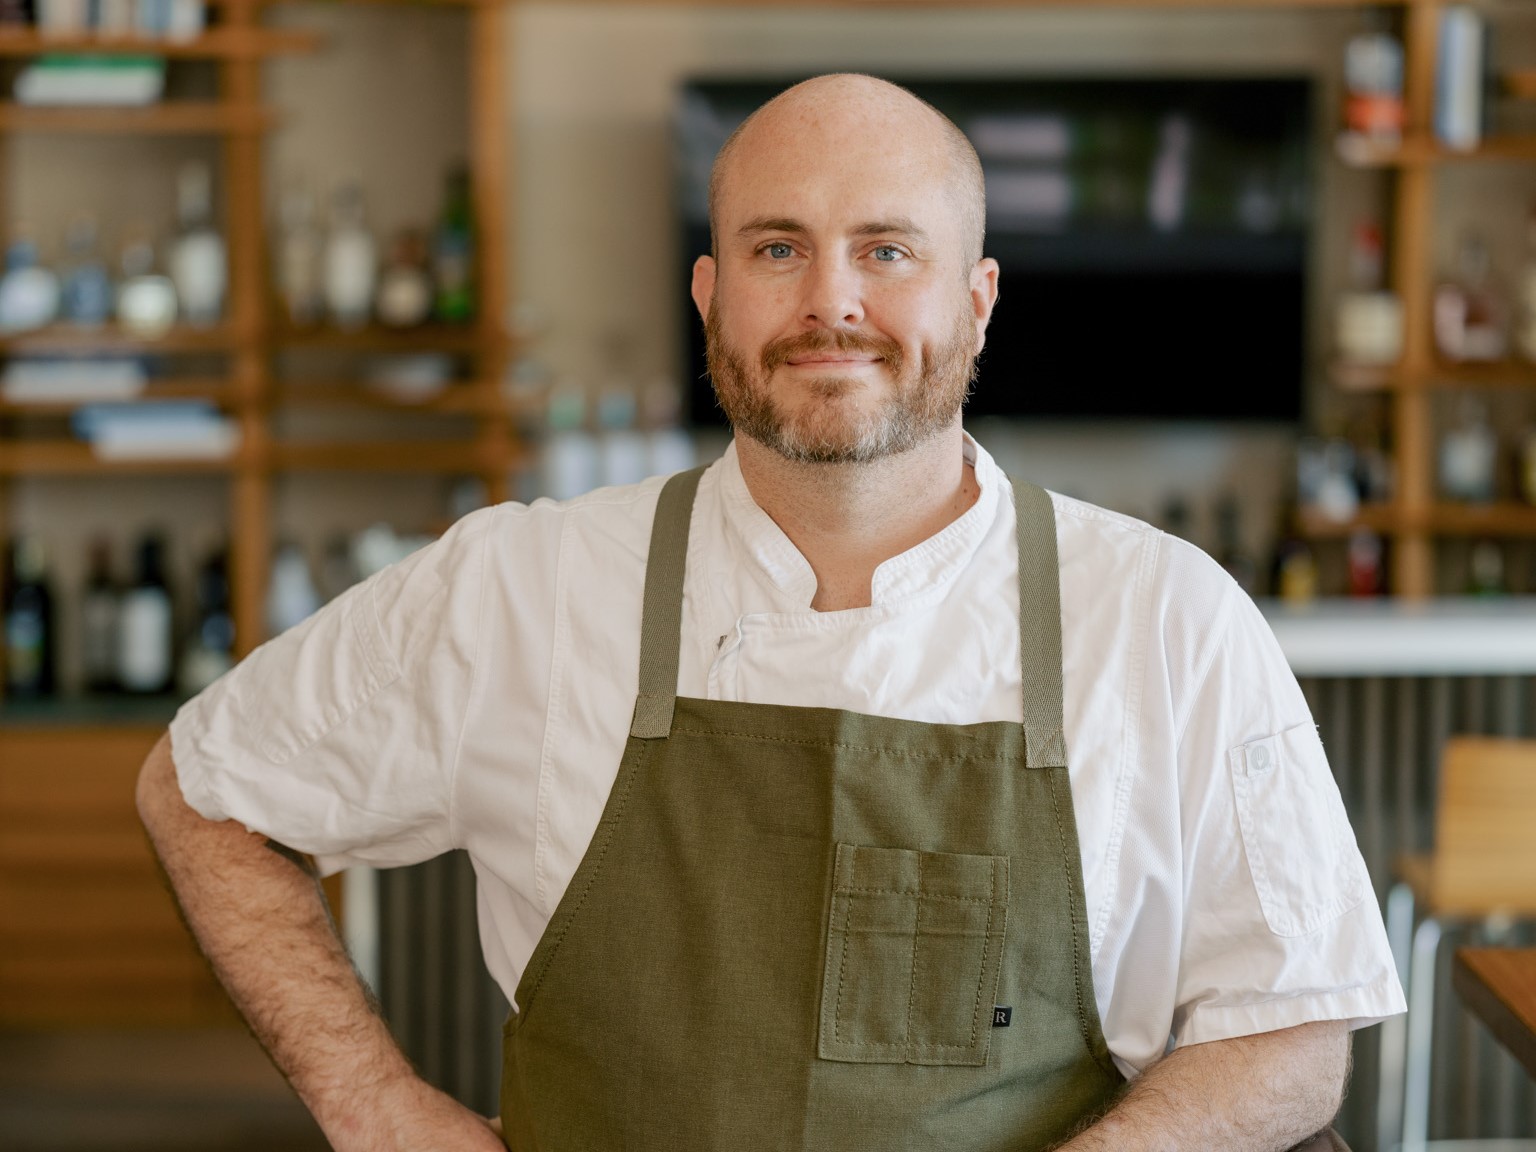 A bald chef with a beard, smiling in an oceanfront restaurant, wearing a white shirt and green apron, with shelves of bottles in the background.